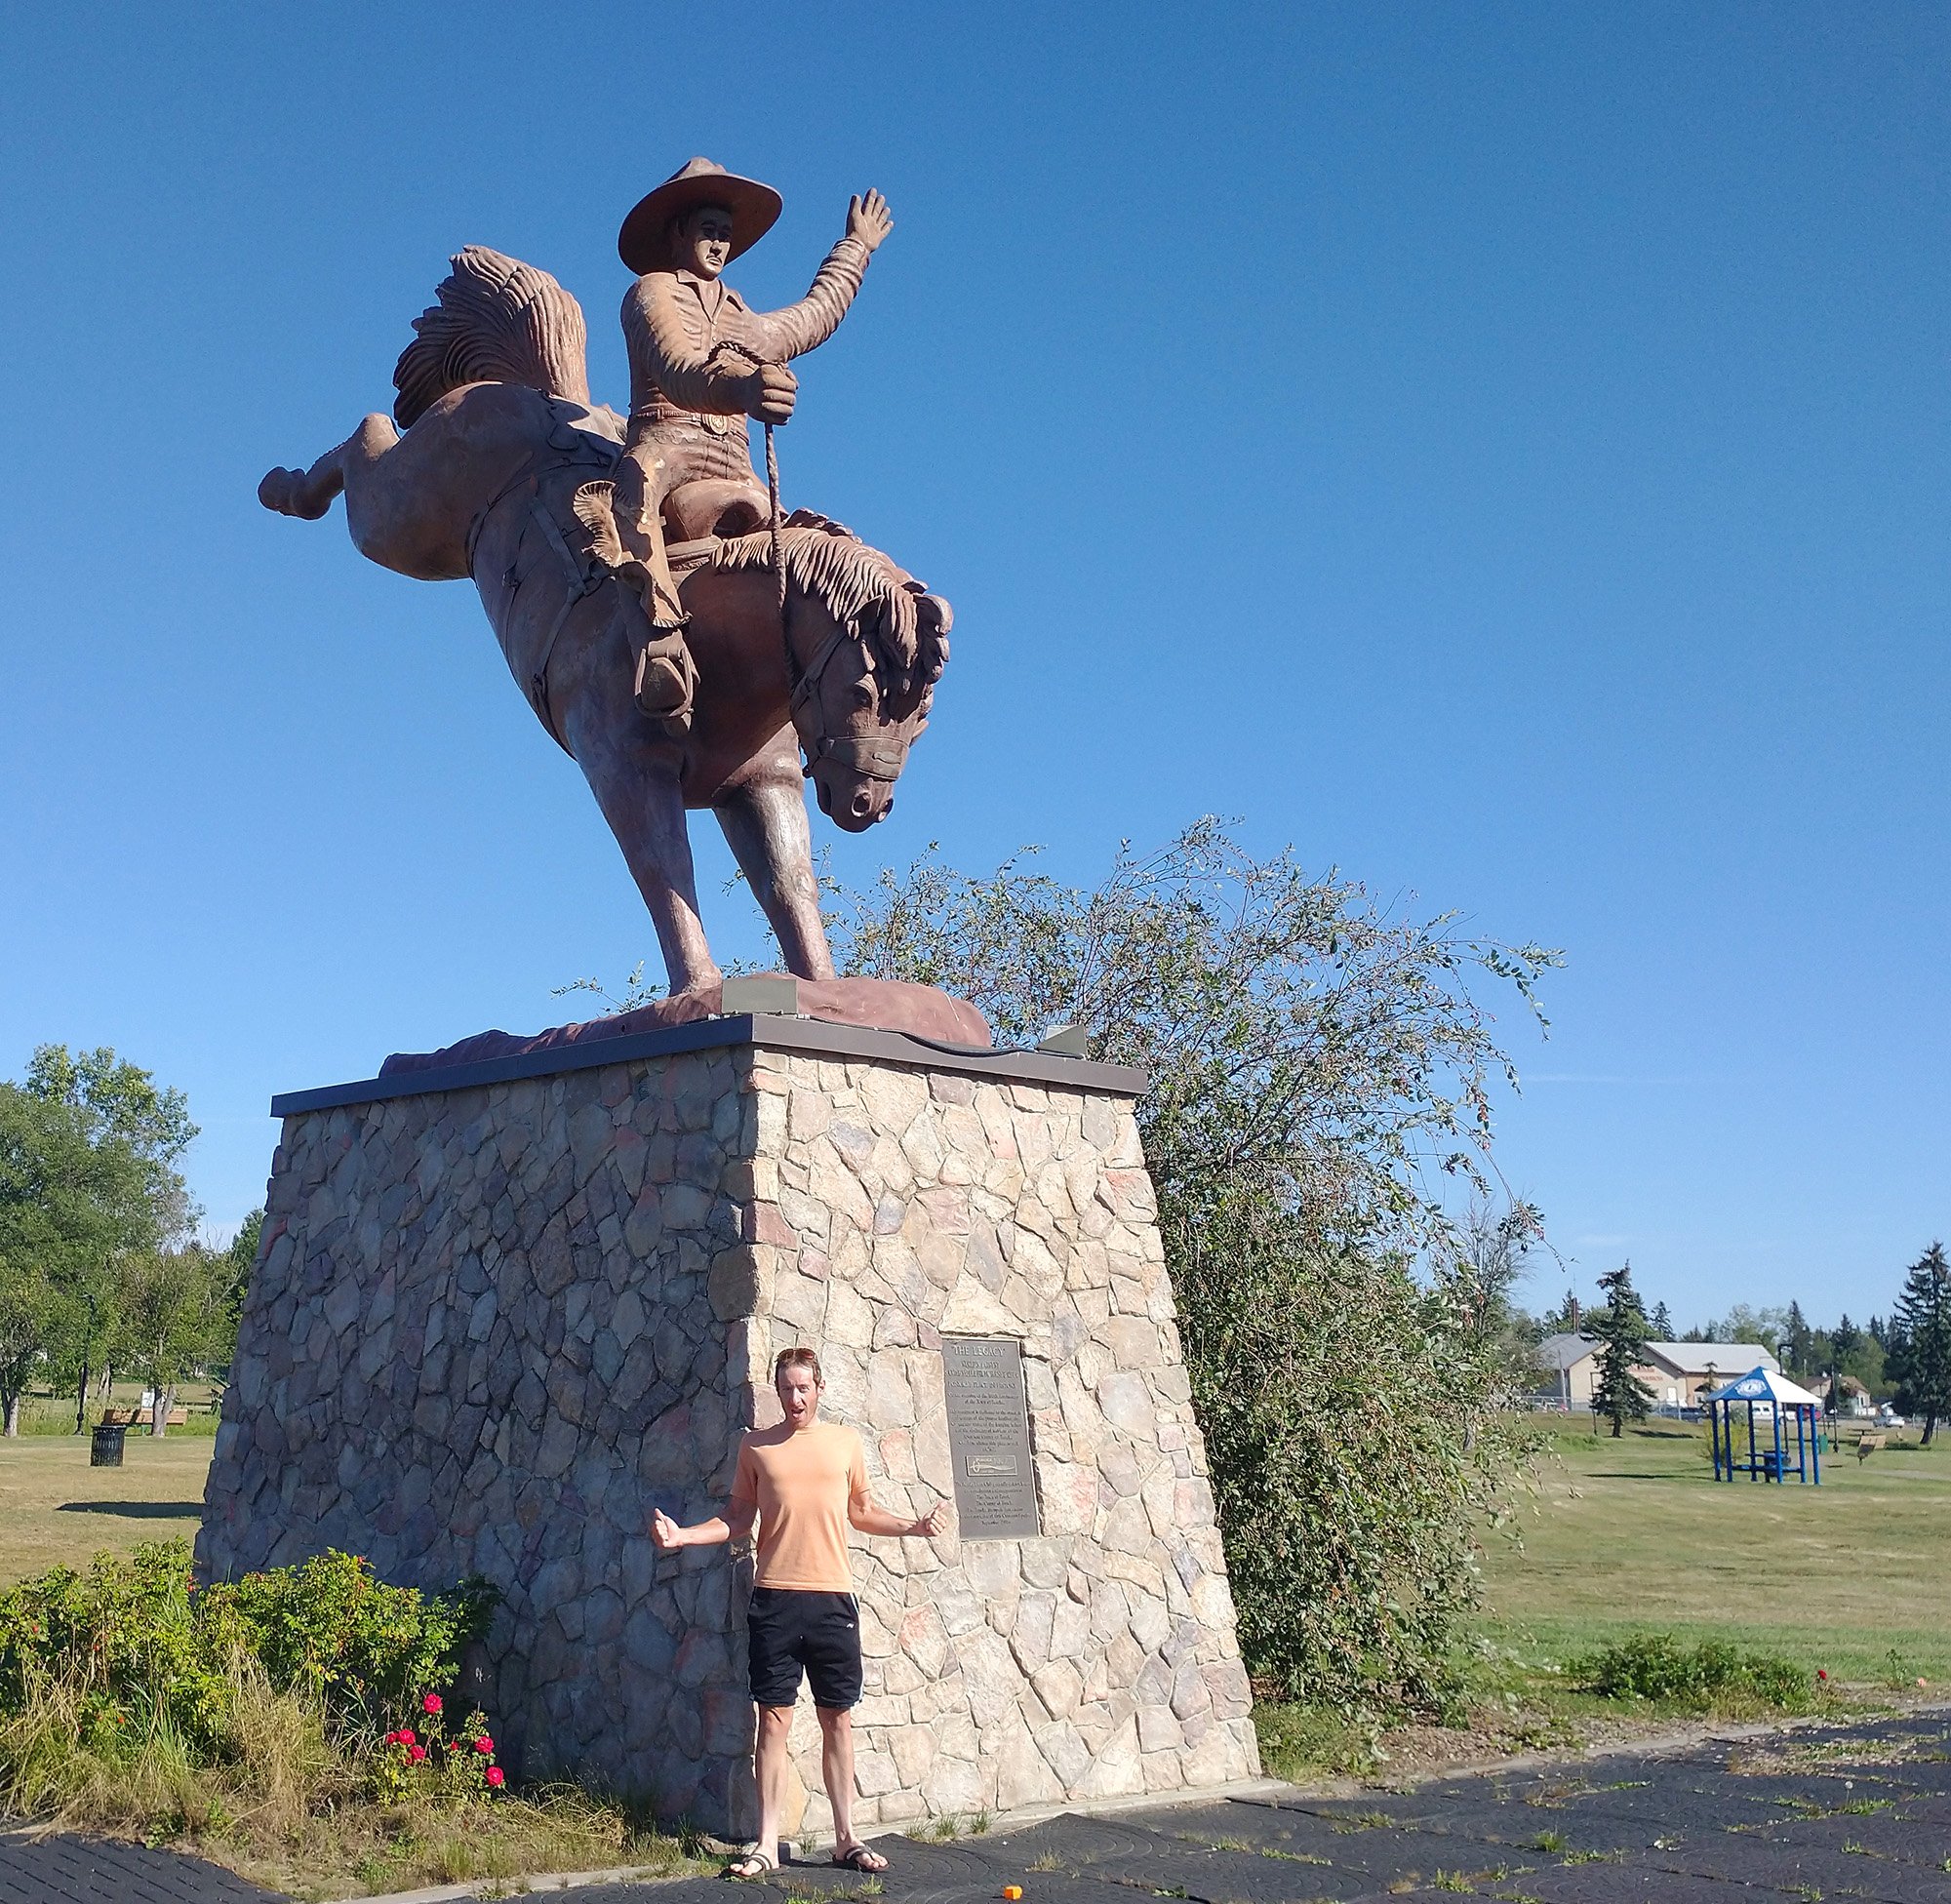 Largest Bunking Bronc with a Rider. Ponoko, AB. Winner by default once again...